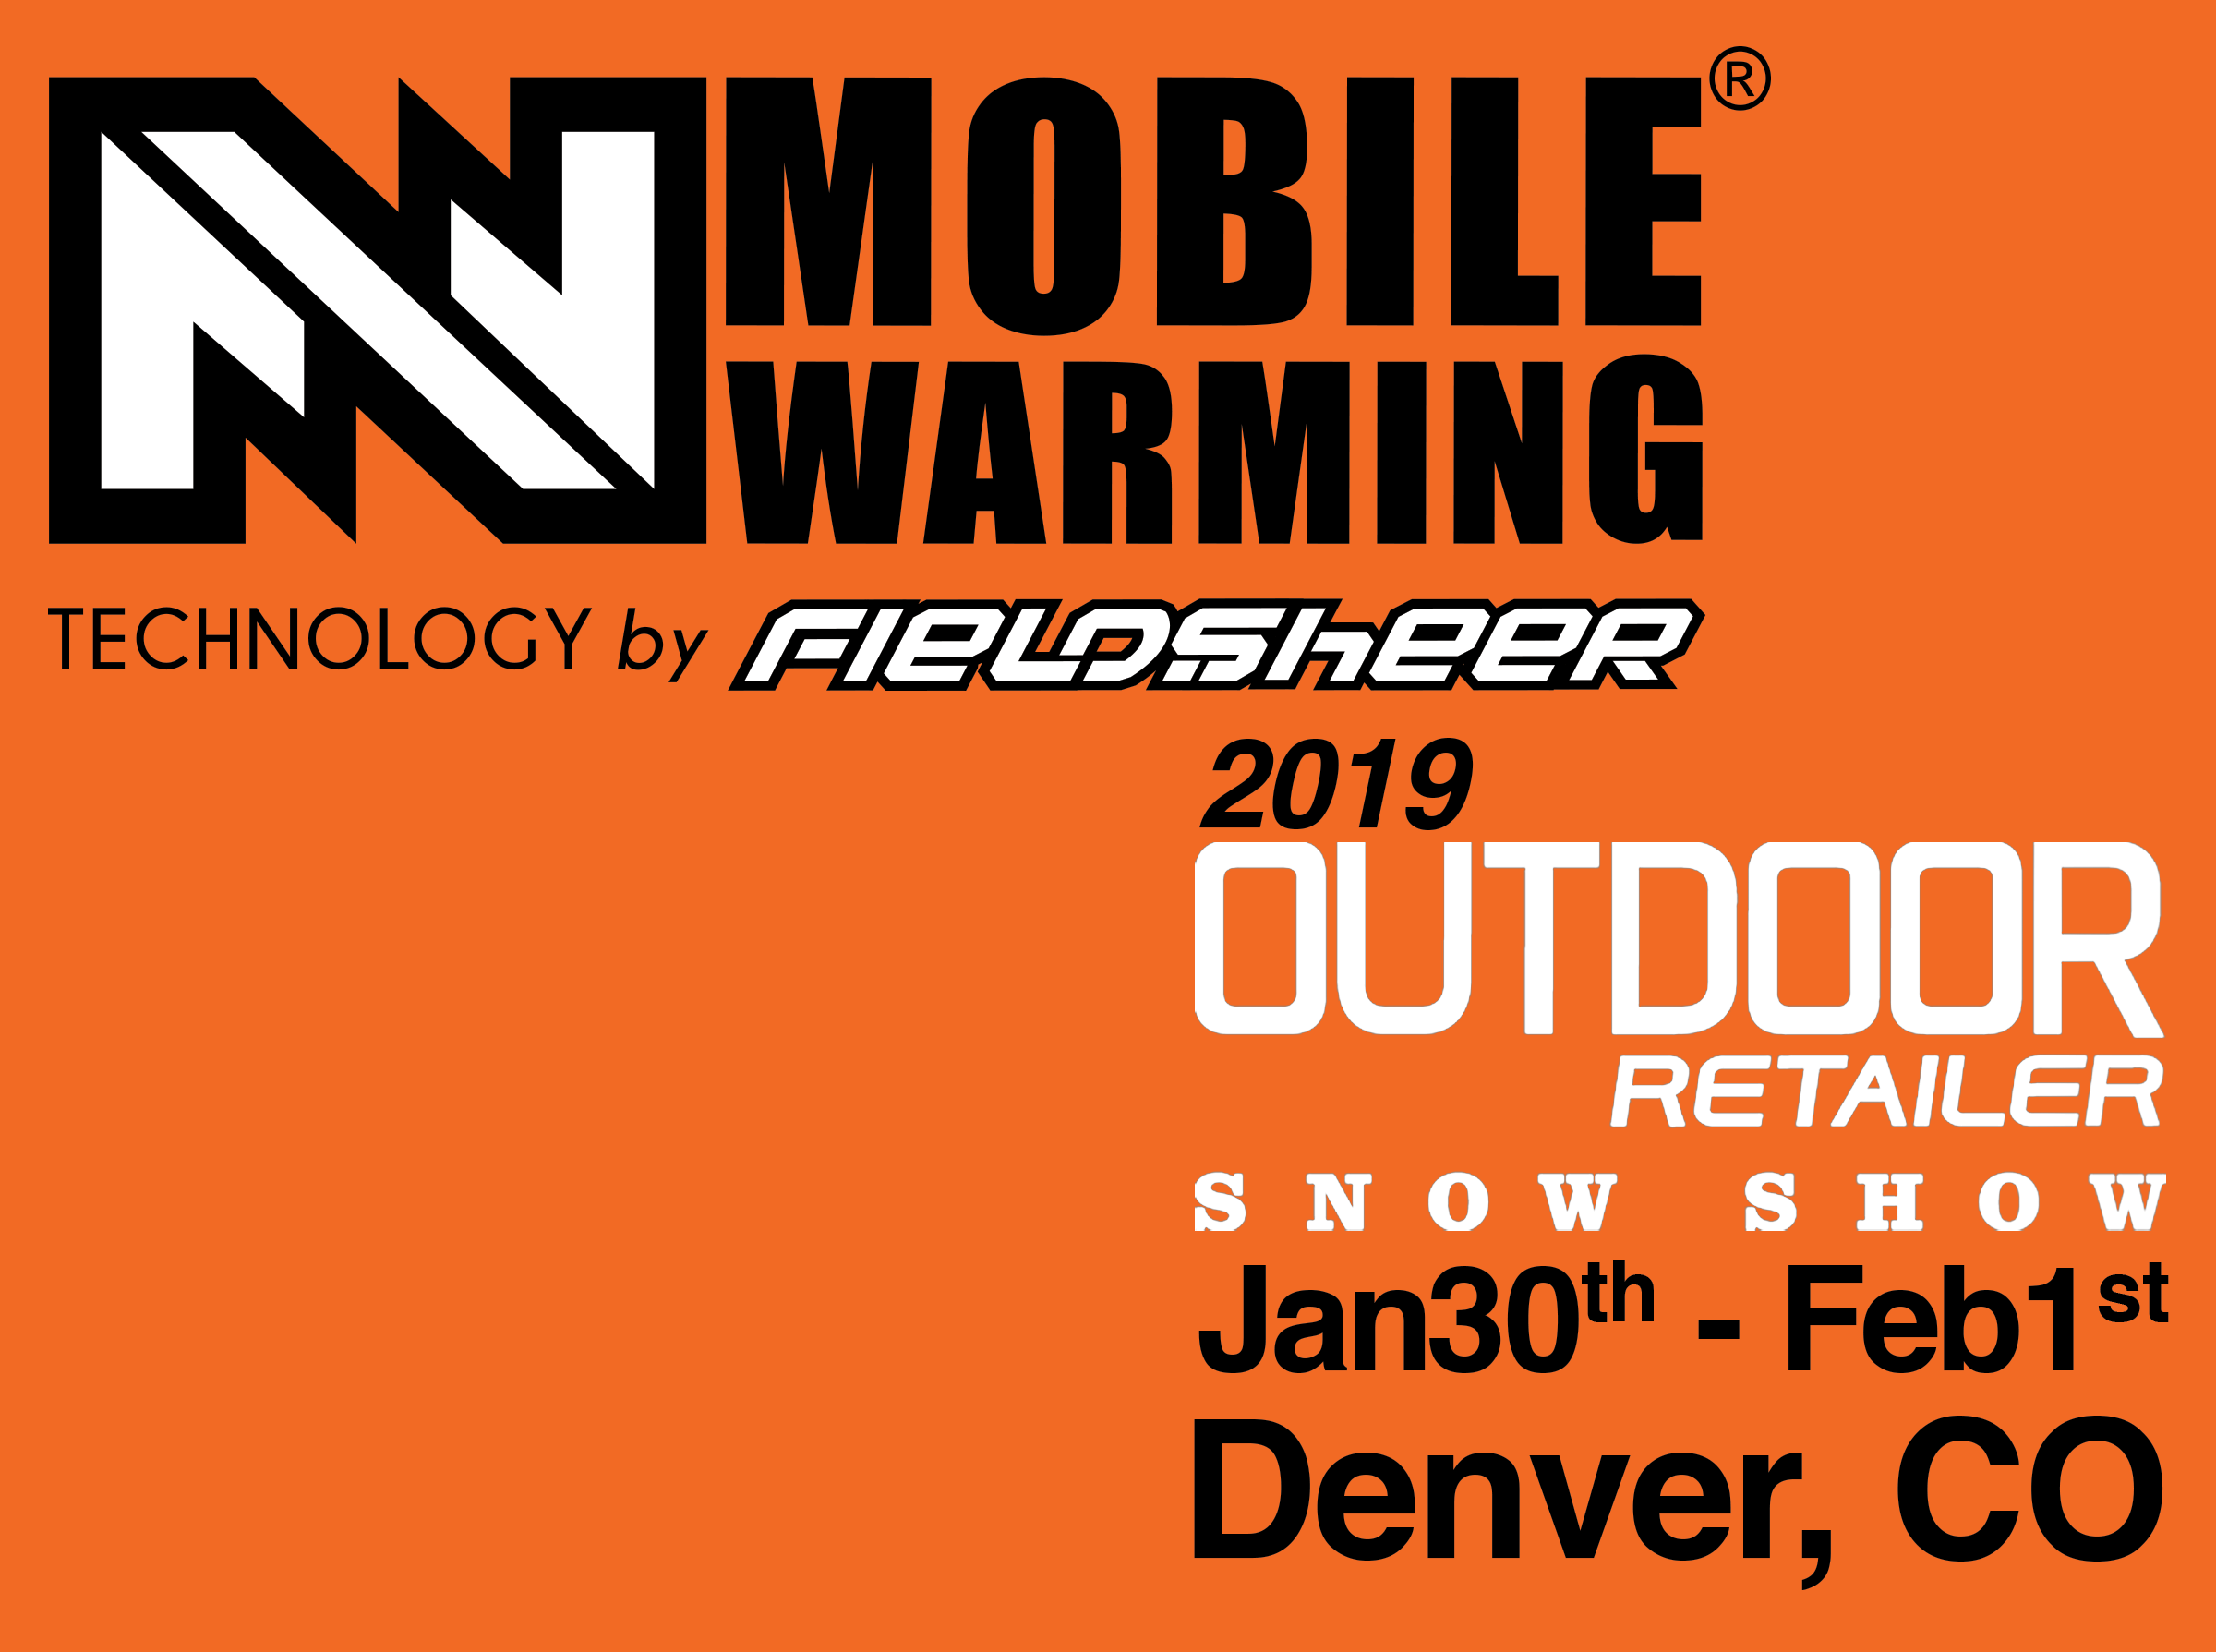 Mobile Warming at Outdoor Retailer Snow Show (Booth #42070_UL)